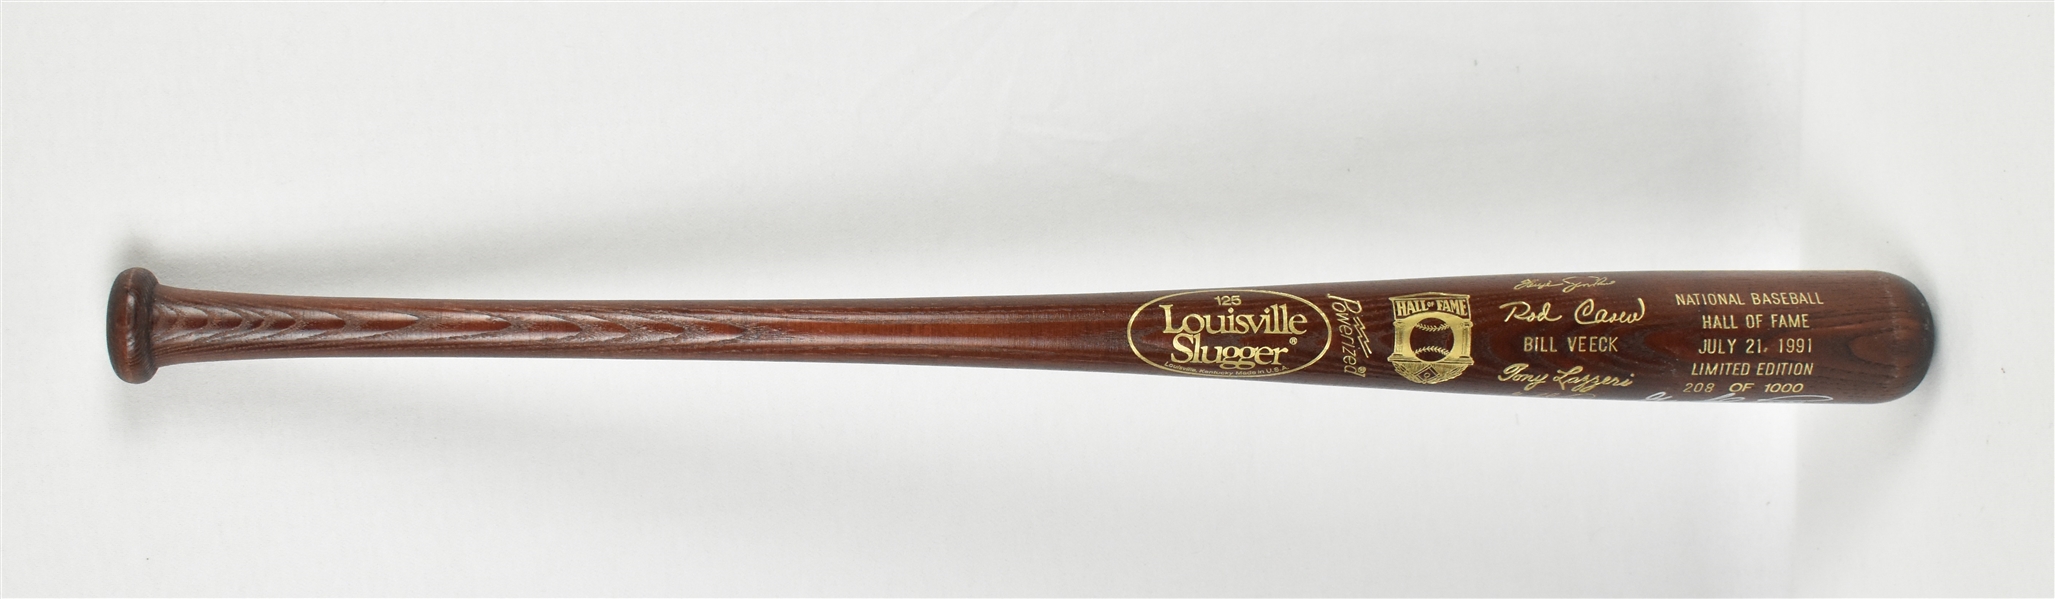 Hall of Fame Class of 1991 Commemorative Limited Edition Brown Bat Signed by Gaylord Perry